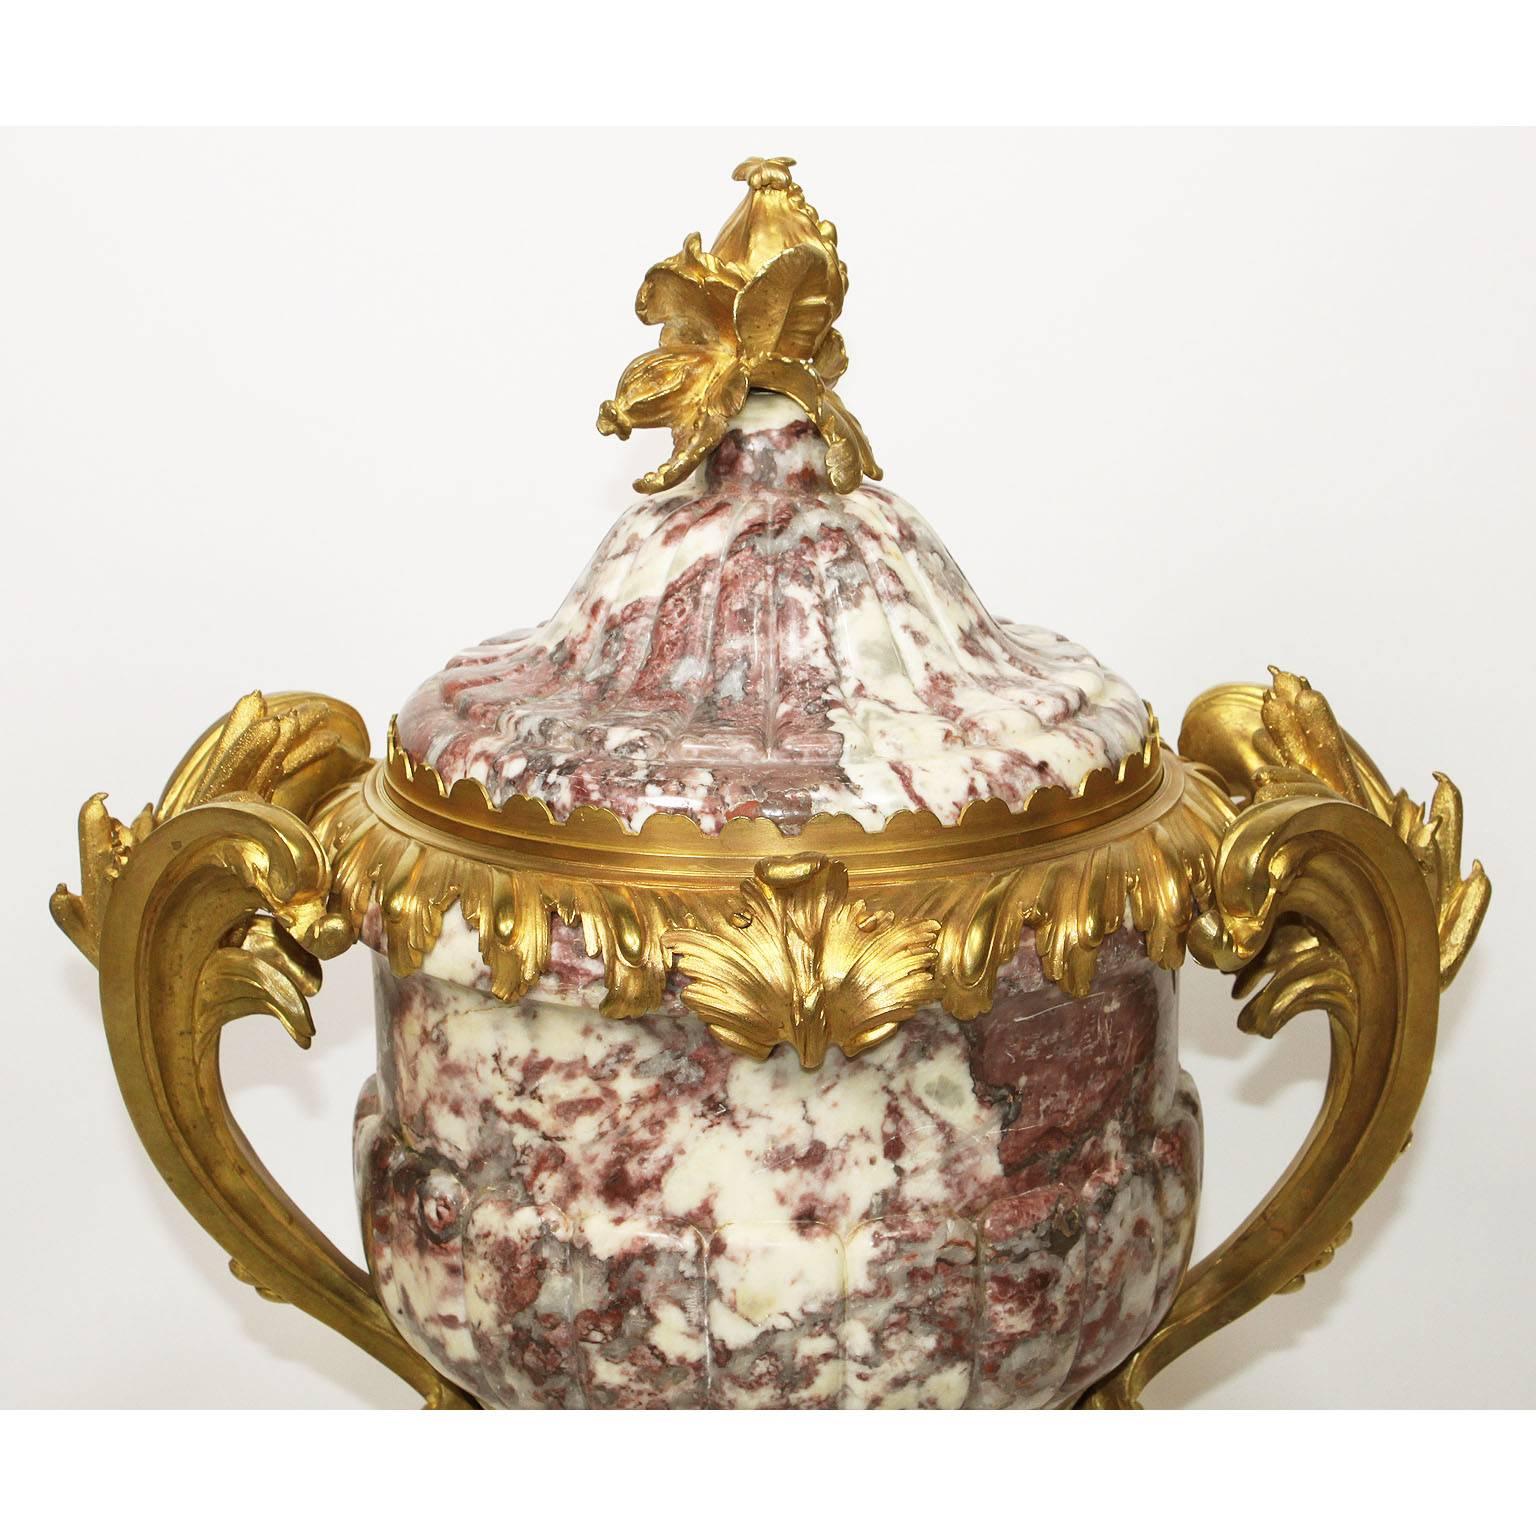 A very fine French 19th-20th century Louis XV style ormolu-mounted Fleur de Pêcher marble vase or urn with a gadrooned cover surmounted by a pomegranate finial, above a tapering ovoid body applied with a pair of scrolled handles cast with